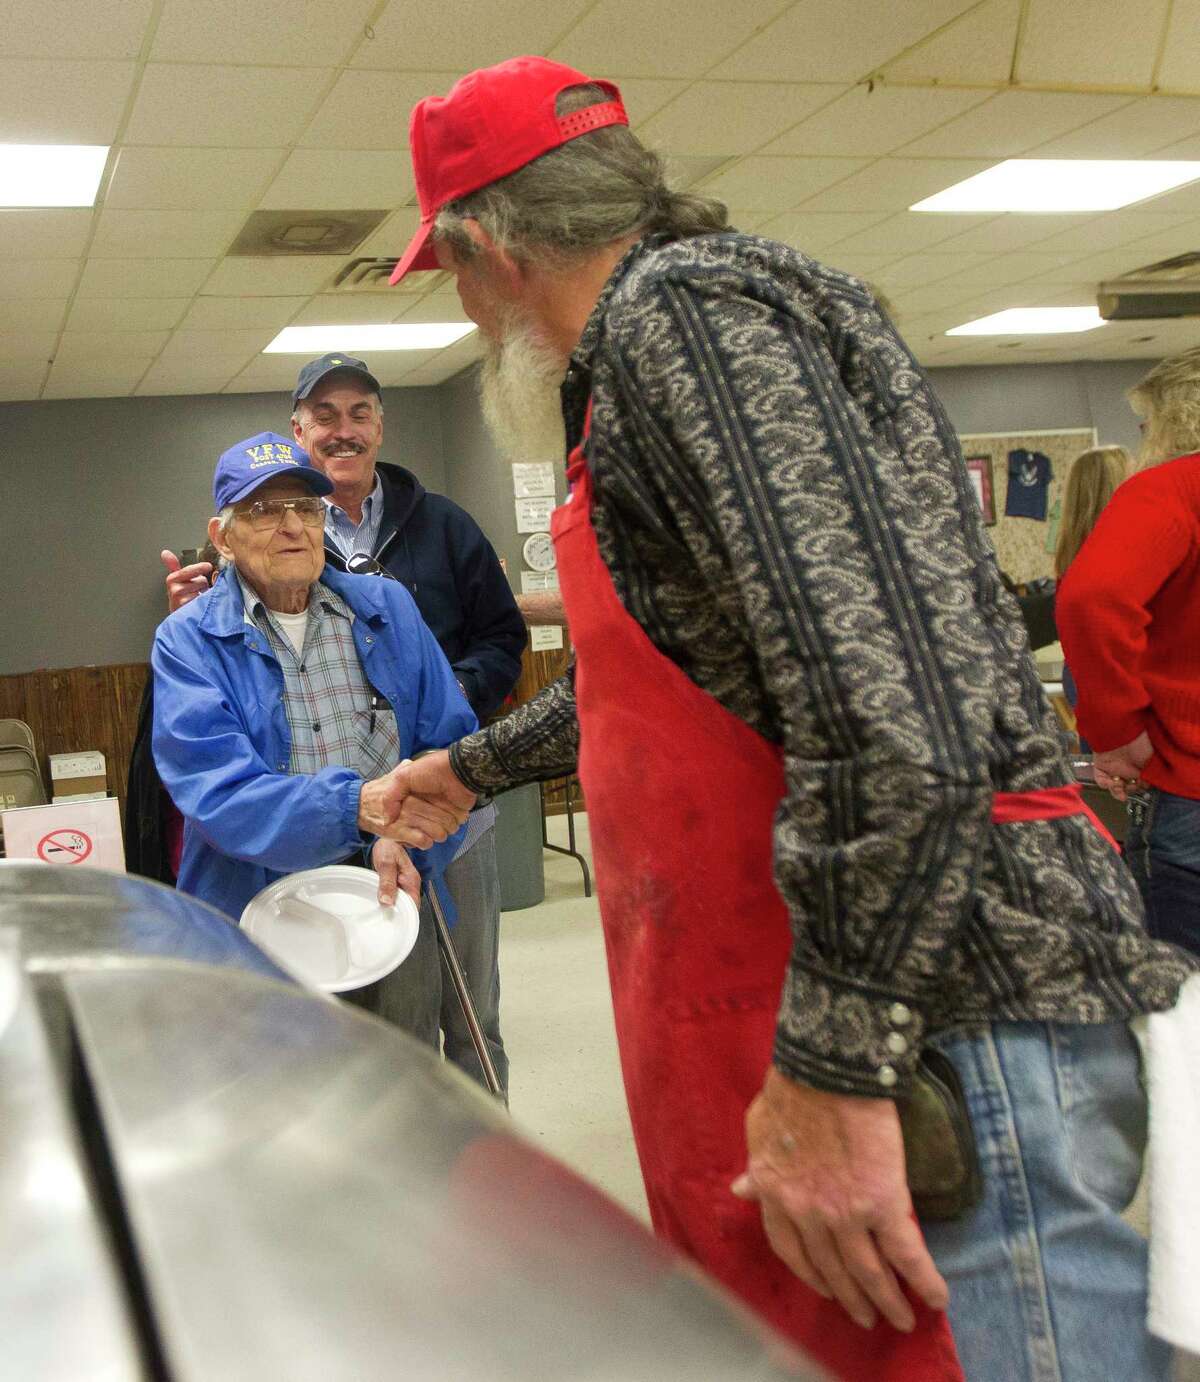 Duane Scott, a World War II veteran who served in the Philippines, shakes hands with U.S. Navy veteran James "Boogie" Fesmire during the annual Conroe Veterans of Foreign War Post 4709 Christmas Day lunch, Monday, Dec. 25, 2017, in Conroe